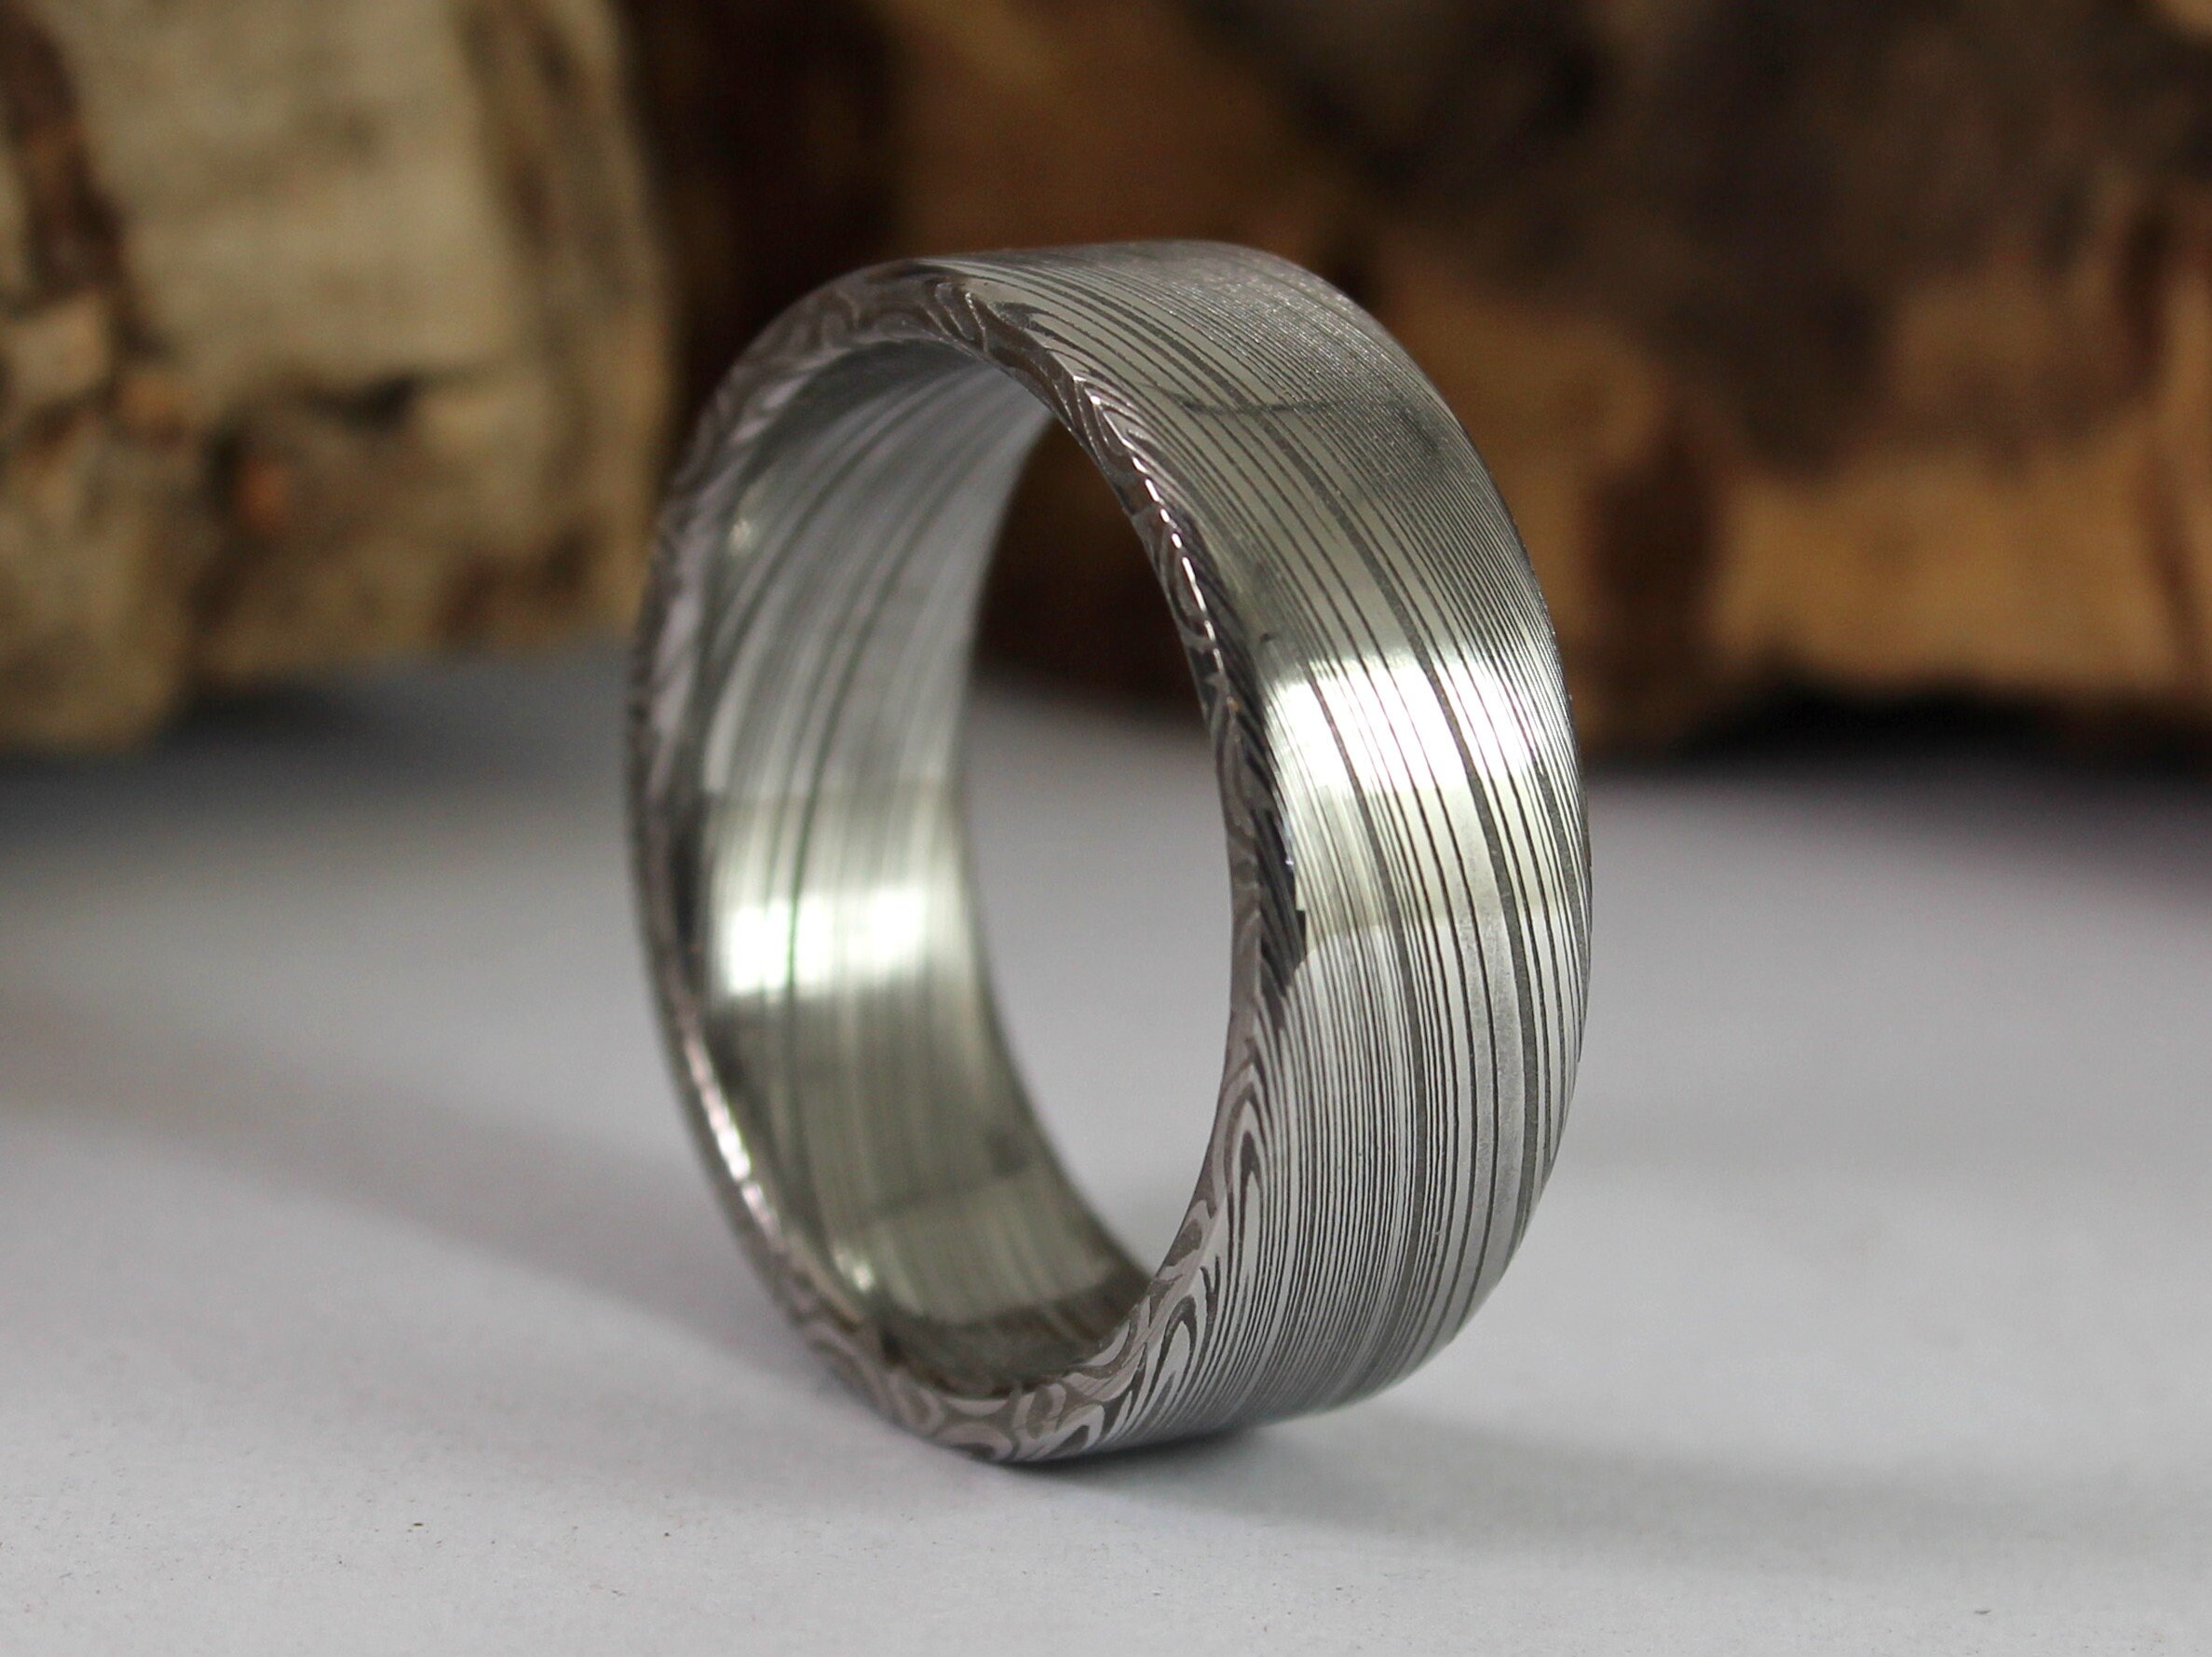 Men's Valyrian Wedding Band in Black | Size 9.5 | Stainless Damascus Steel Ring | Modern Gents Trading Co